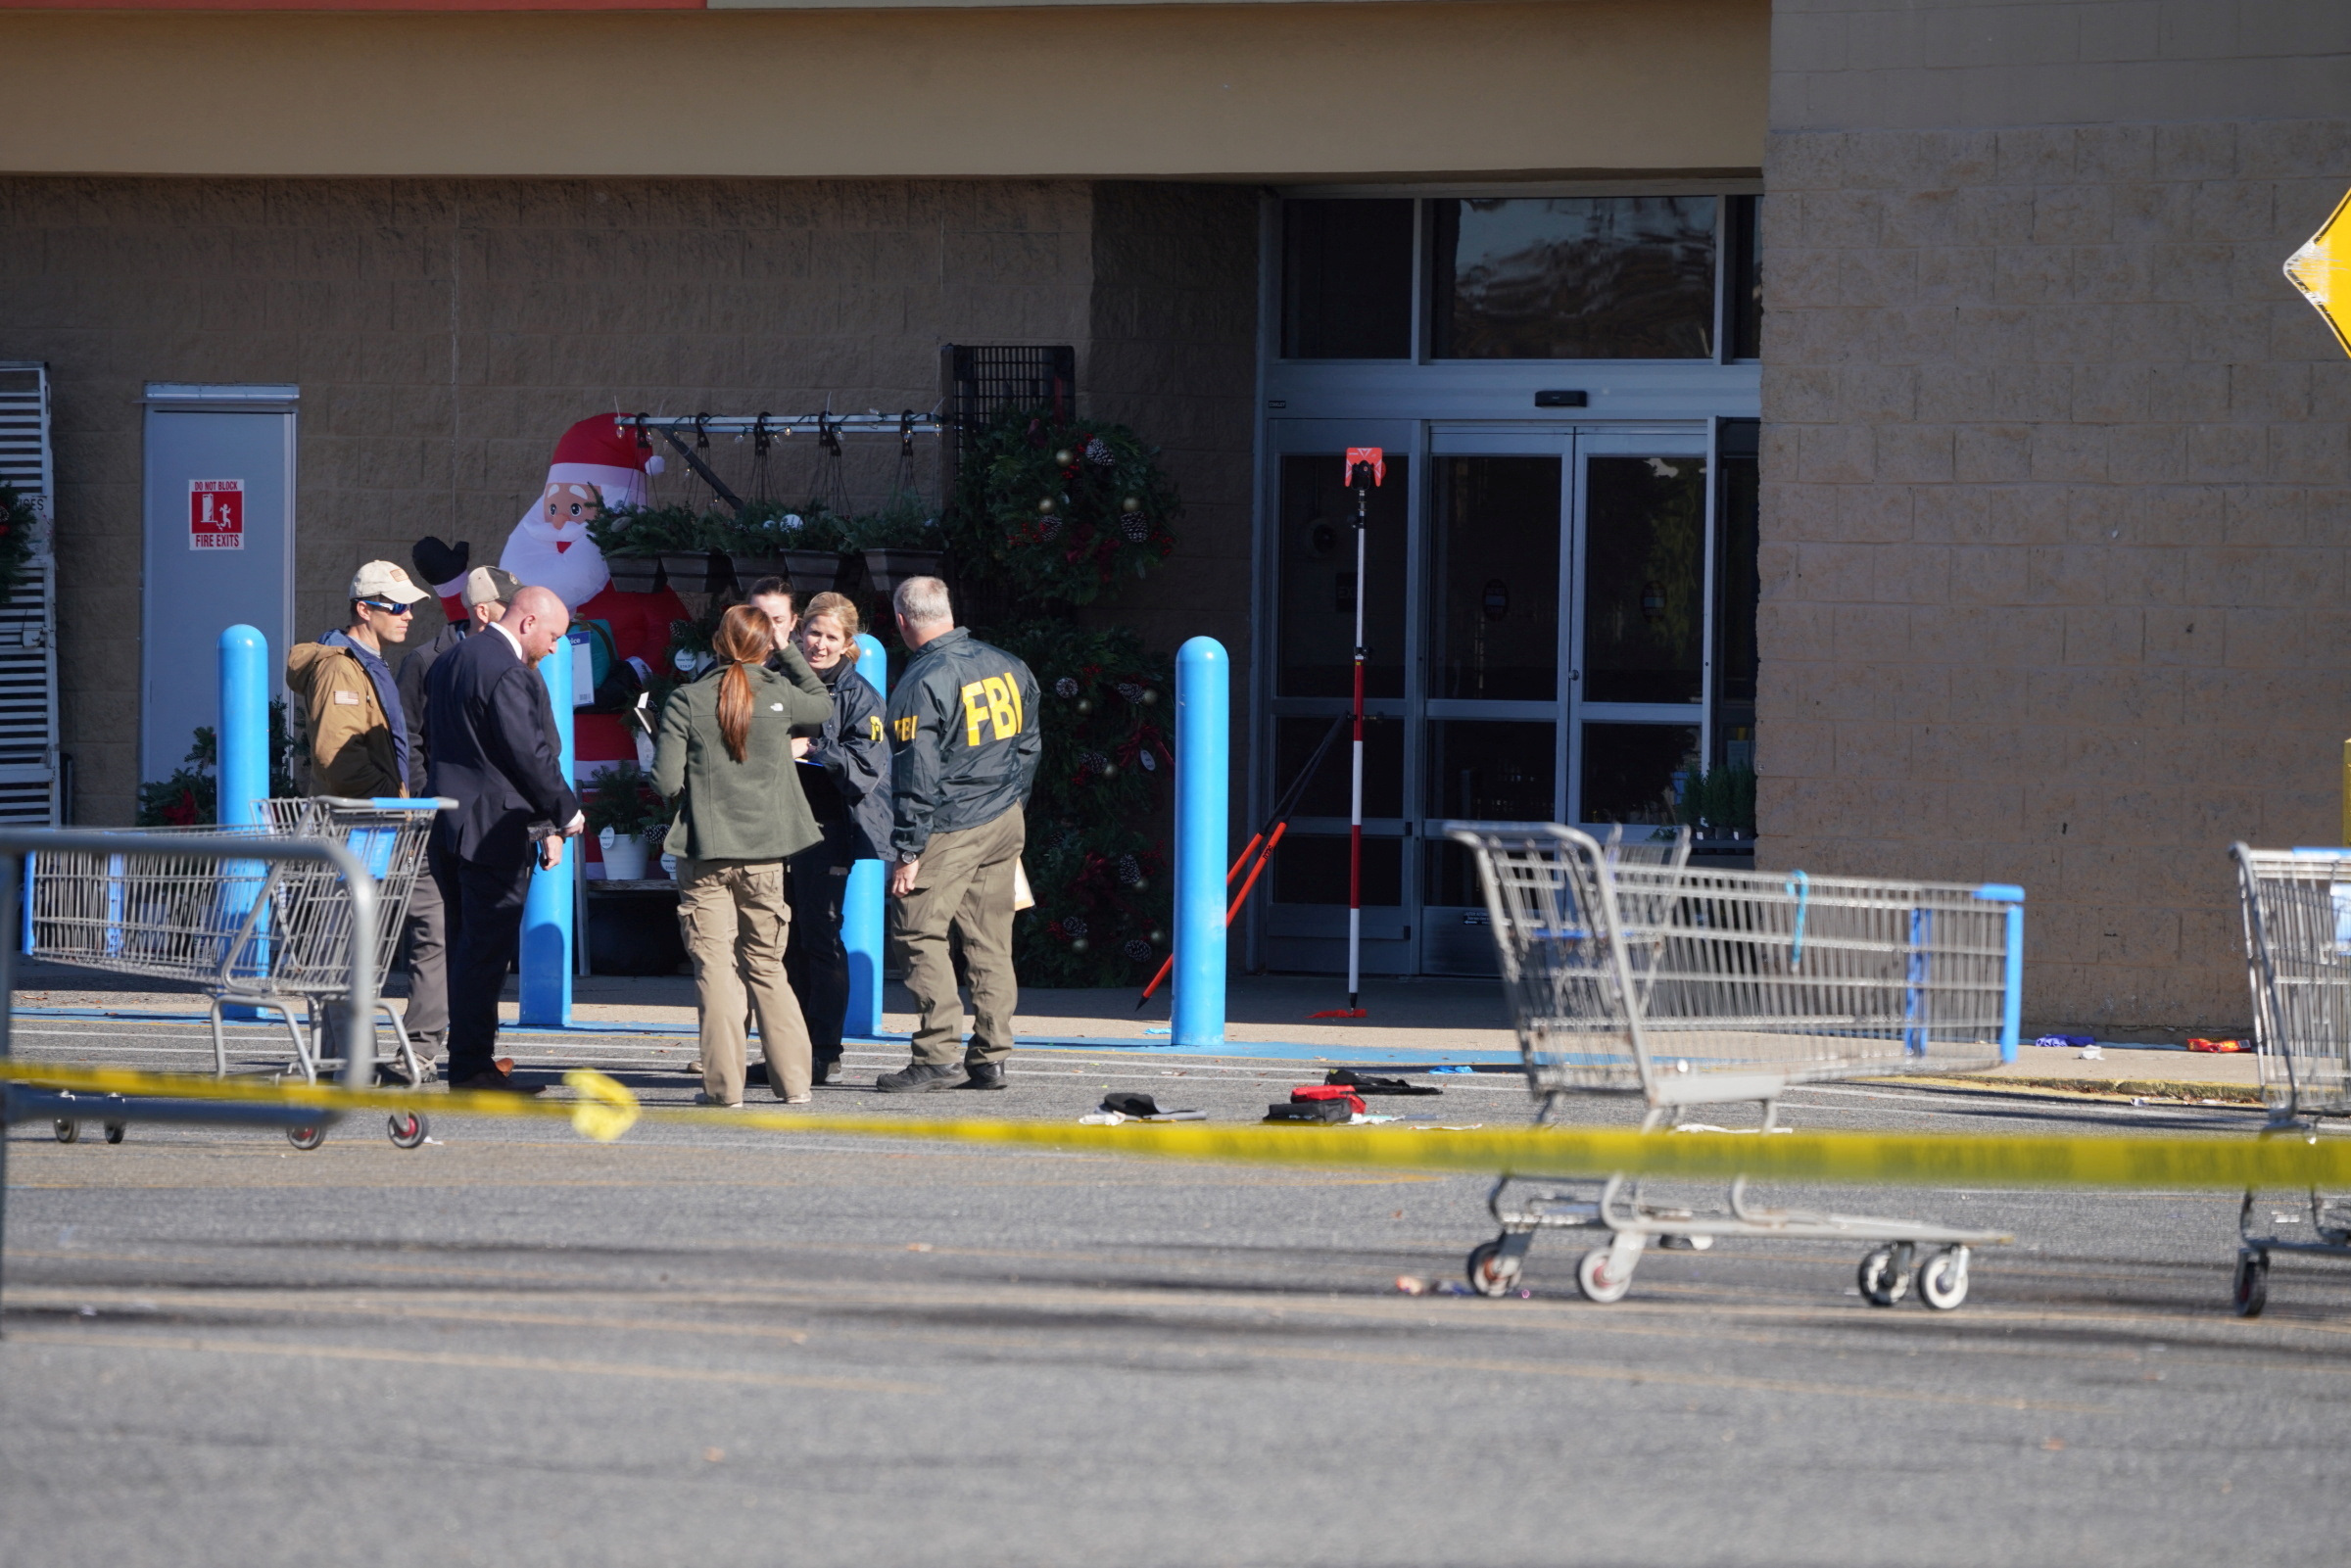 The aftermath of the mass shooting at Walmart in Chesapeake